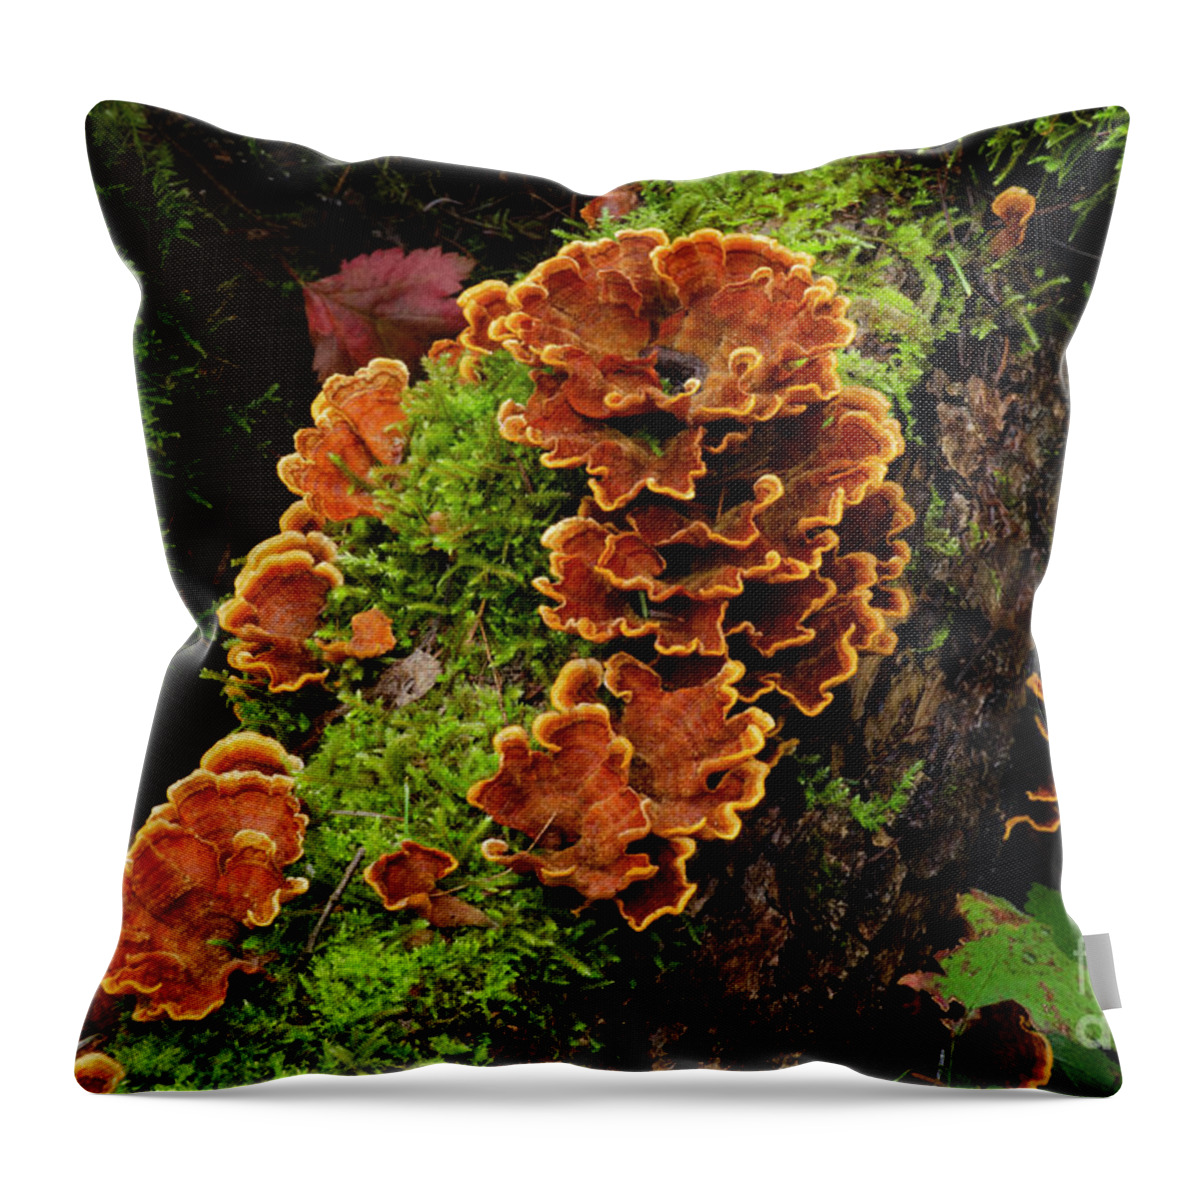 Macro Throw Pillow featuring the photograph Checking In On Mother Nature 1 by Bob Christopher